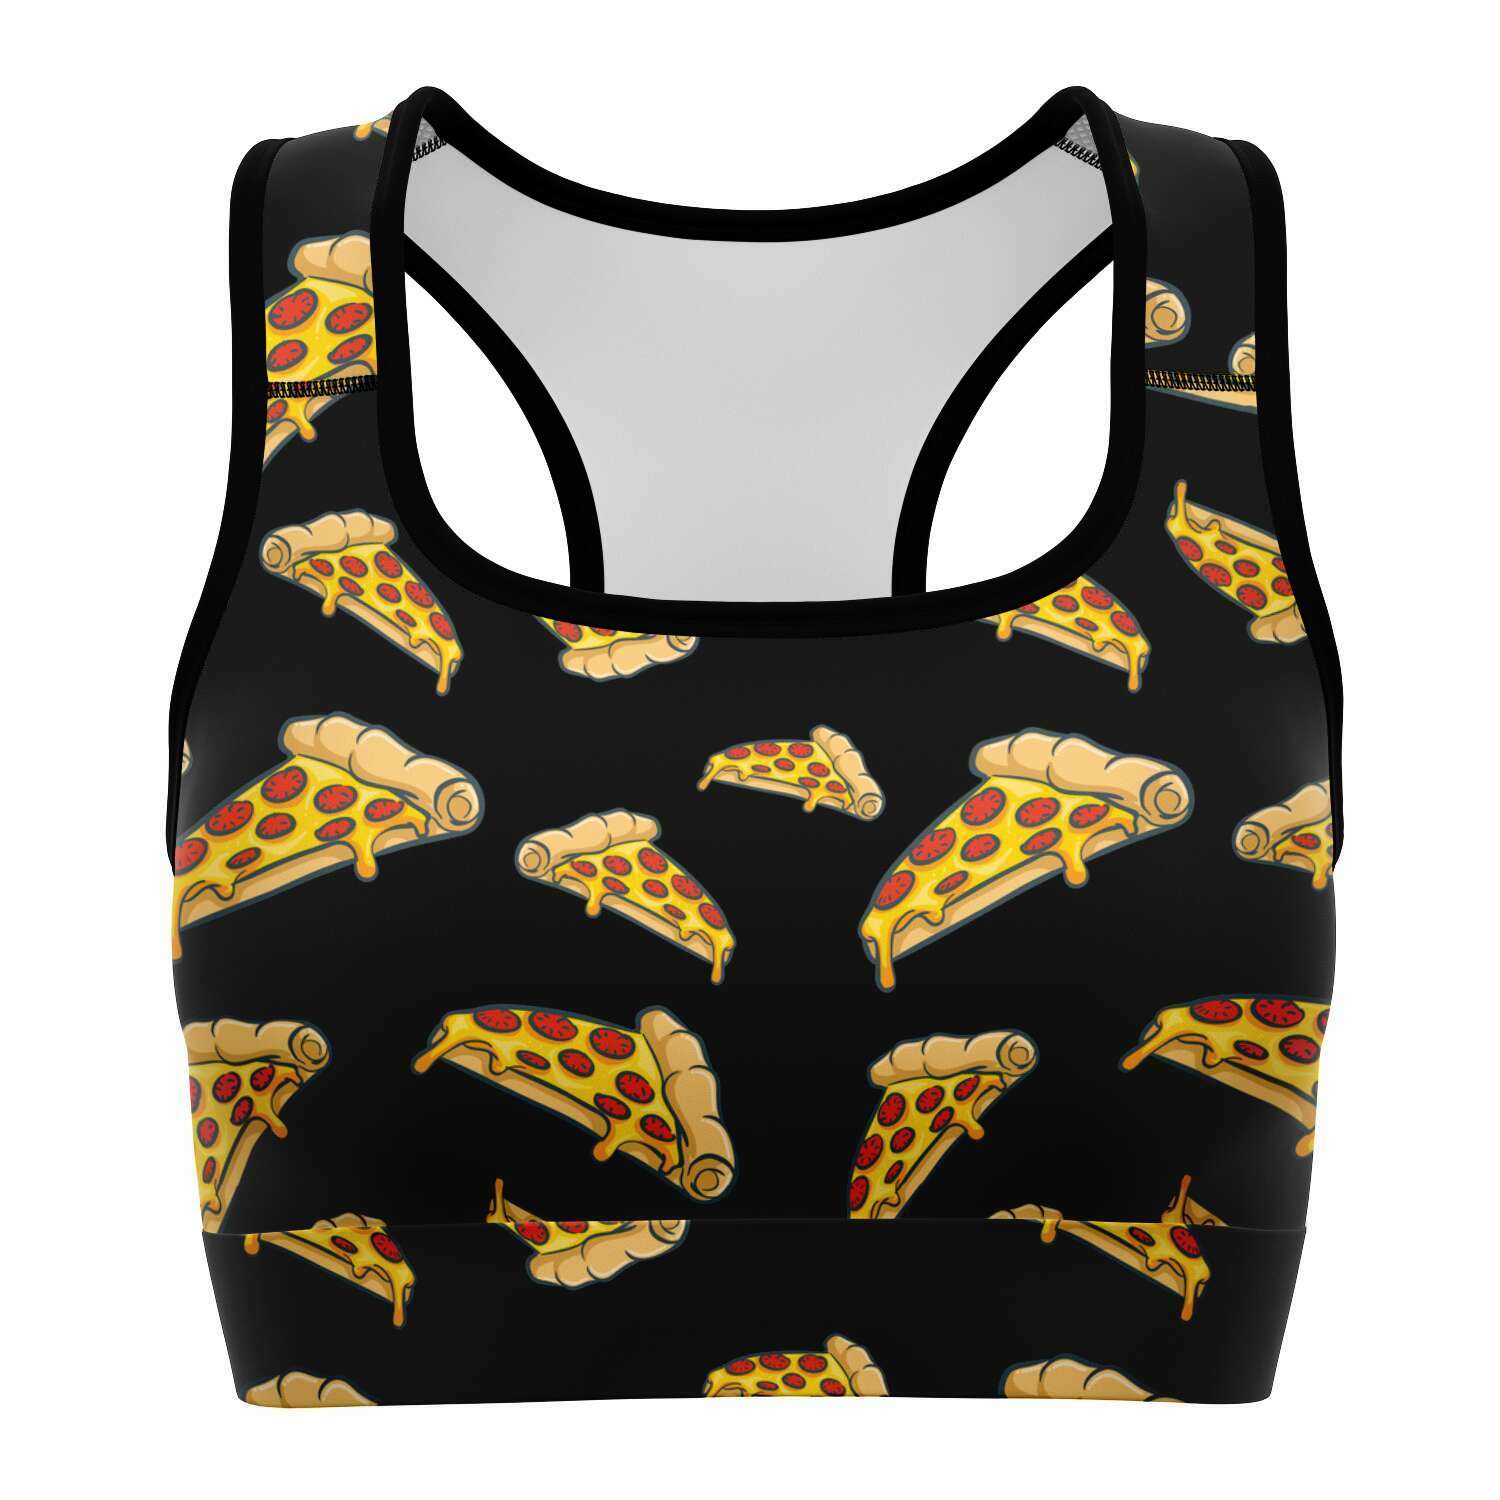 Women's Late Night Hot Pepperoni Pizza Party Athletic Sports Bra